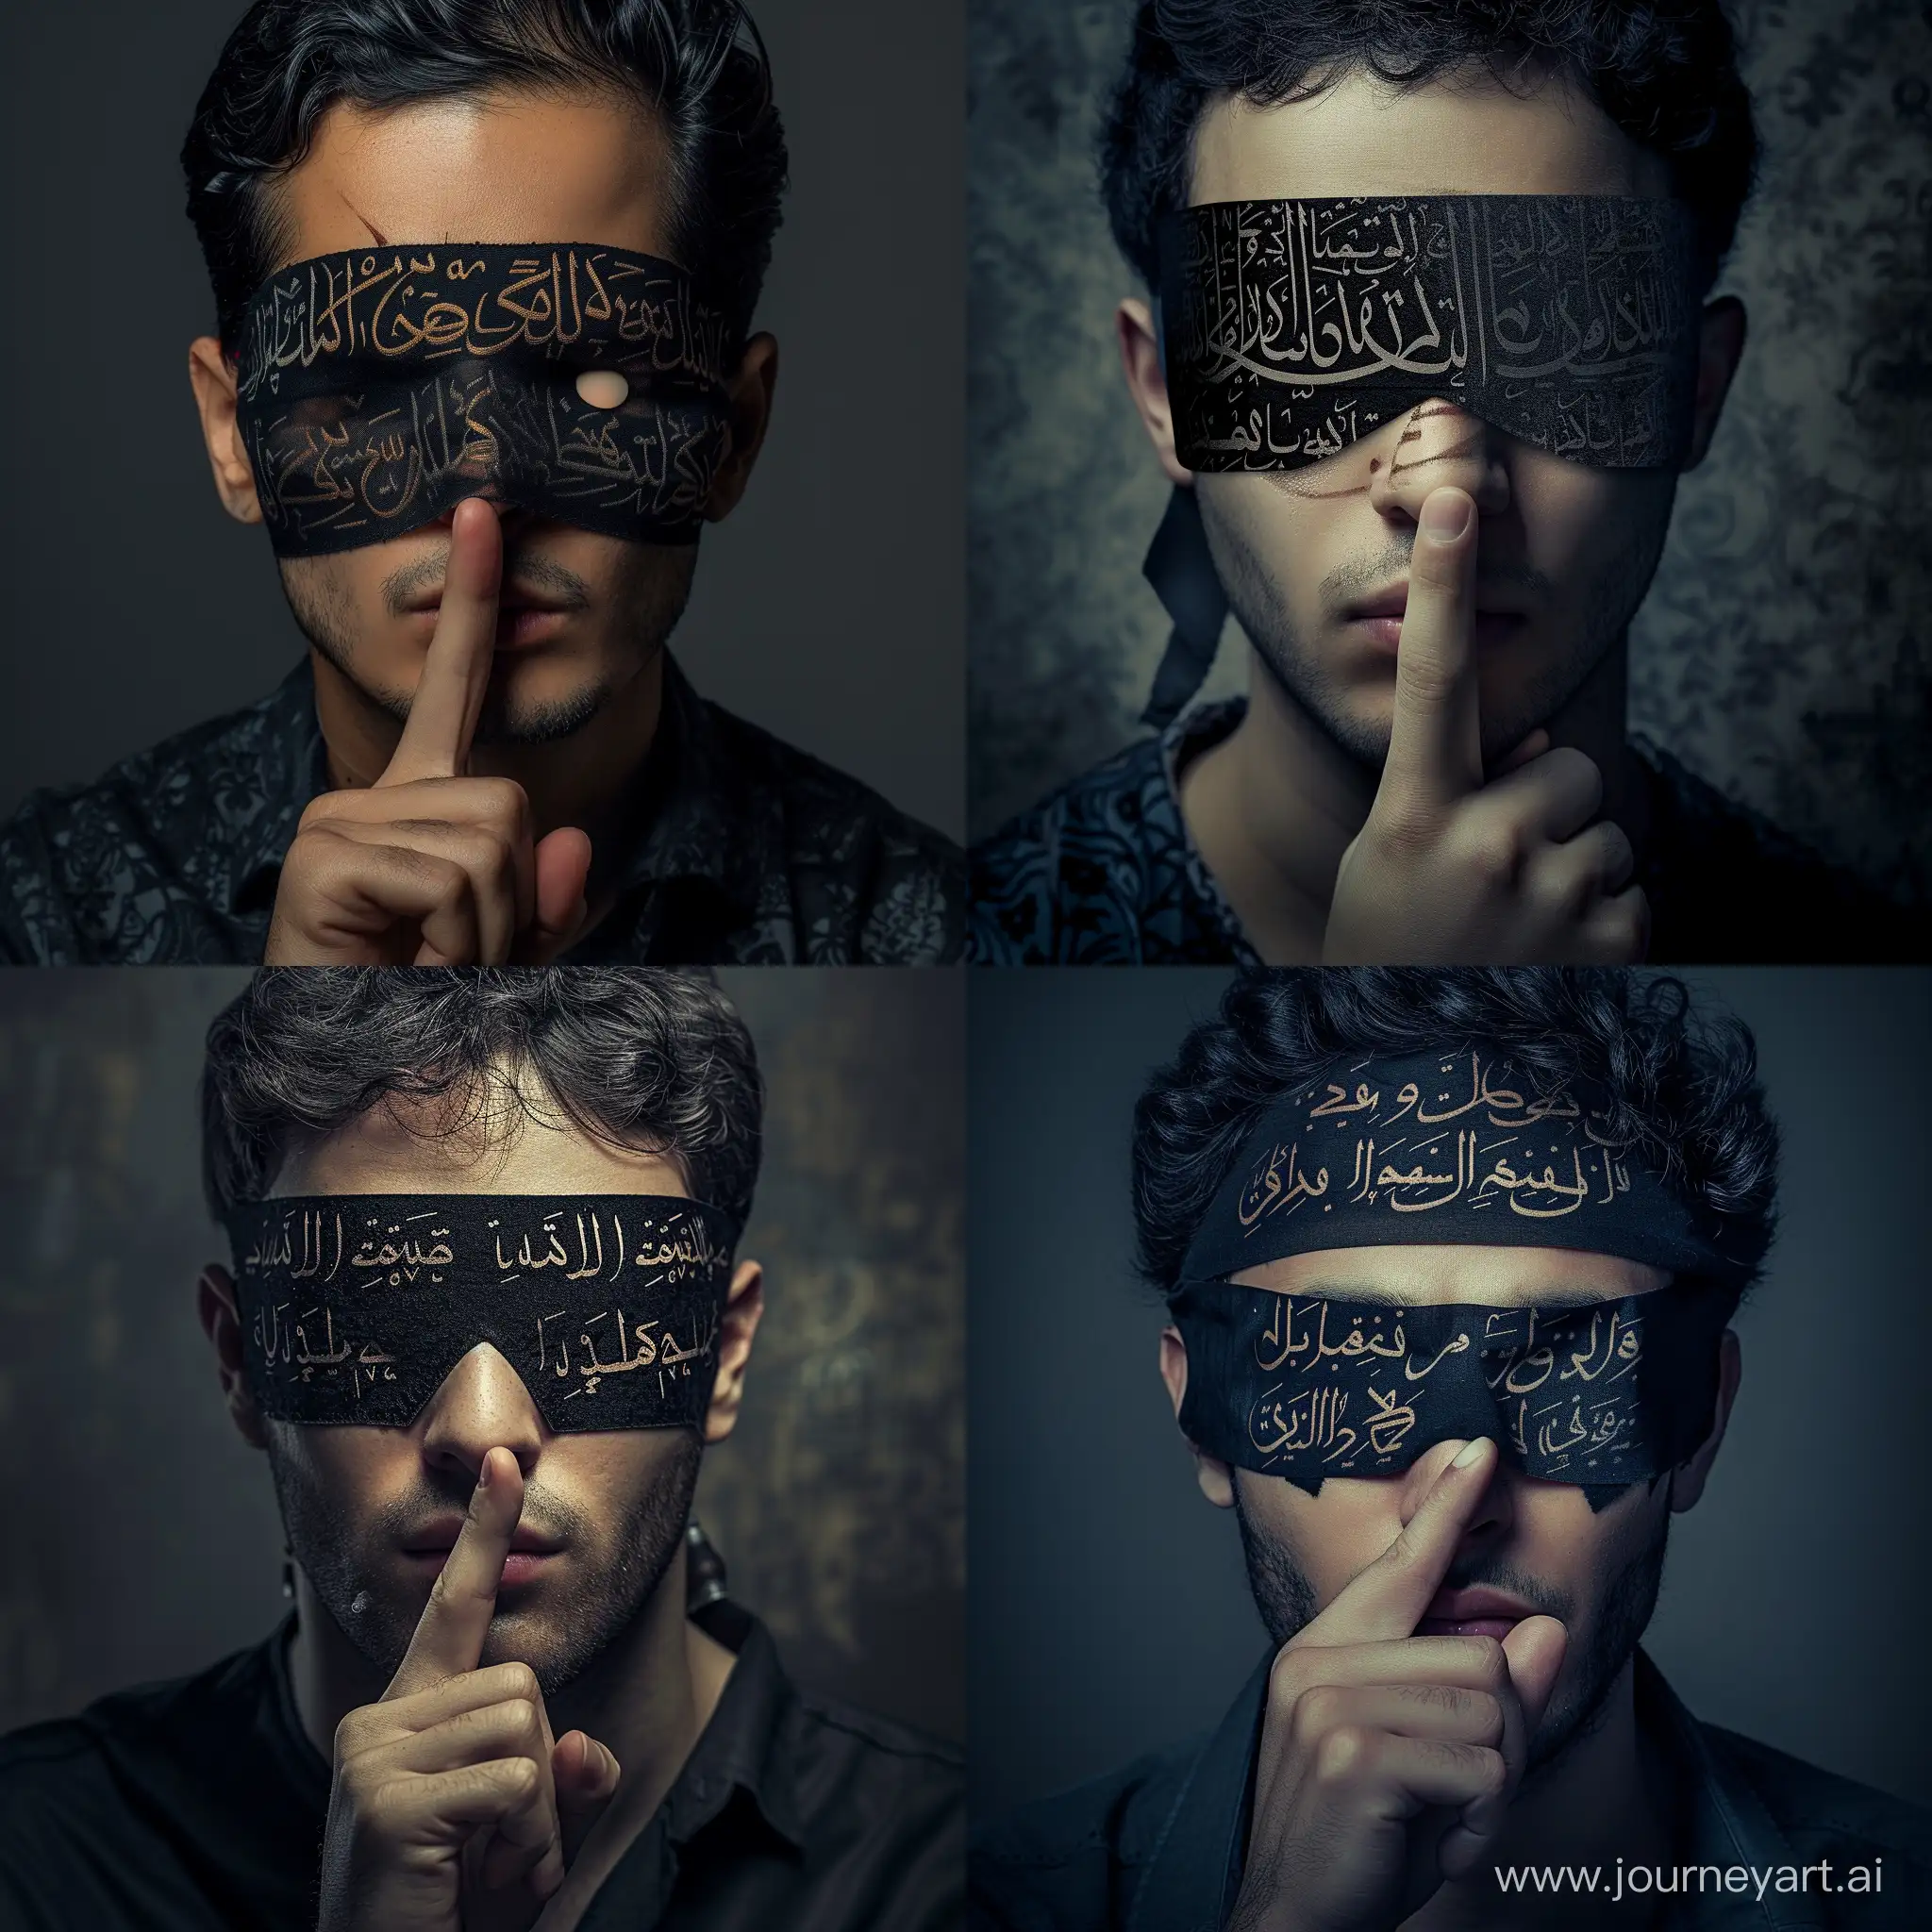 Imagine a man with his index finger pressed against his lips, wearing a black bandage over his eyes adorned with beautifully written Arabic script. The surreal nature of the scene adds an intriguing element to the character